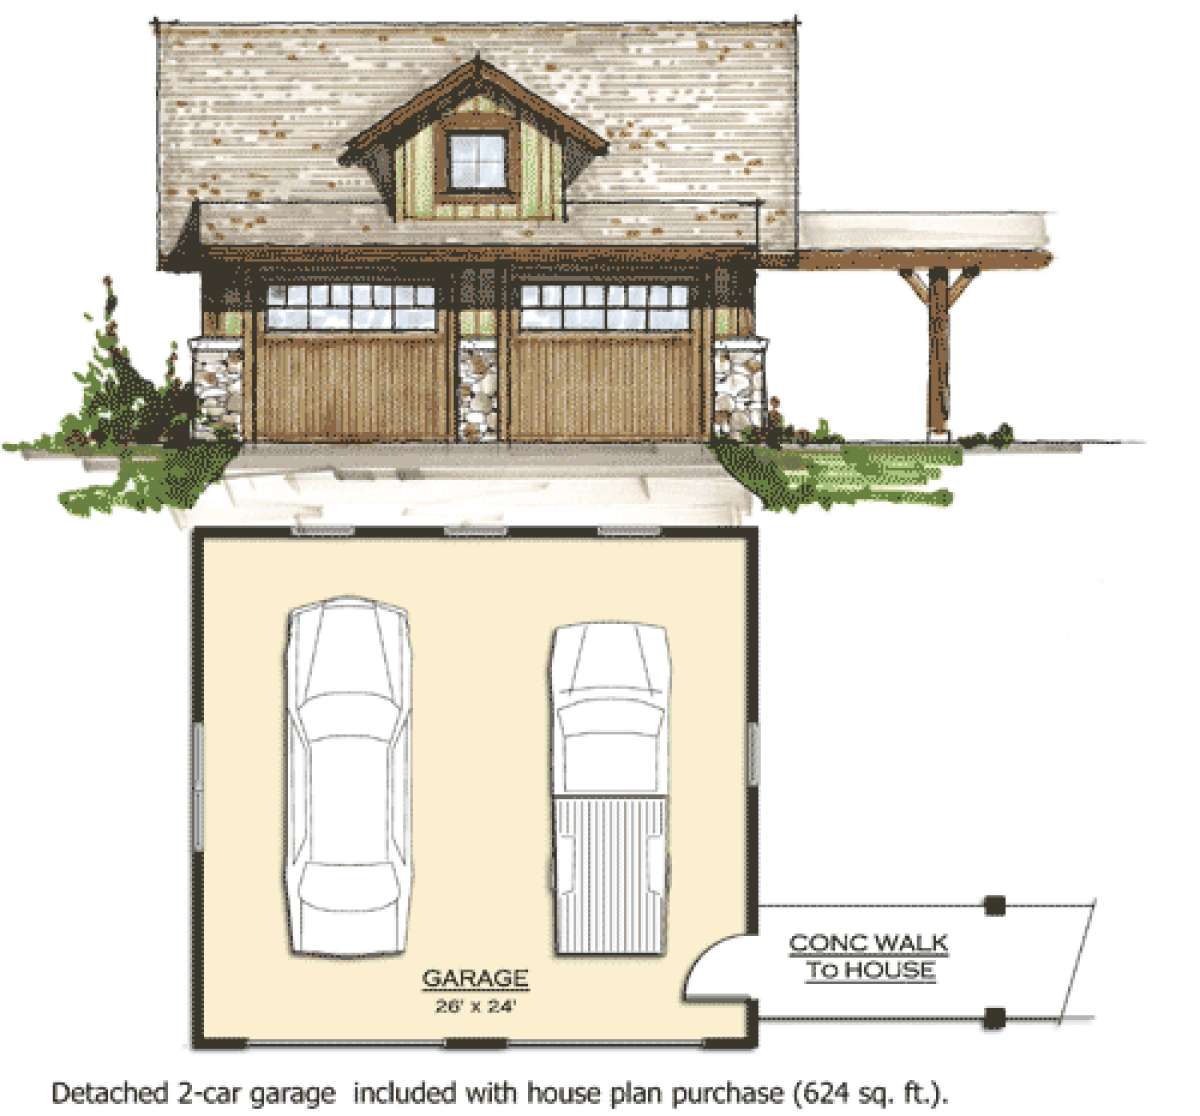 Garage for House Plan #8504-00062